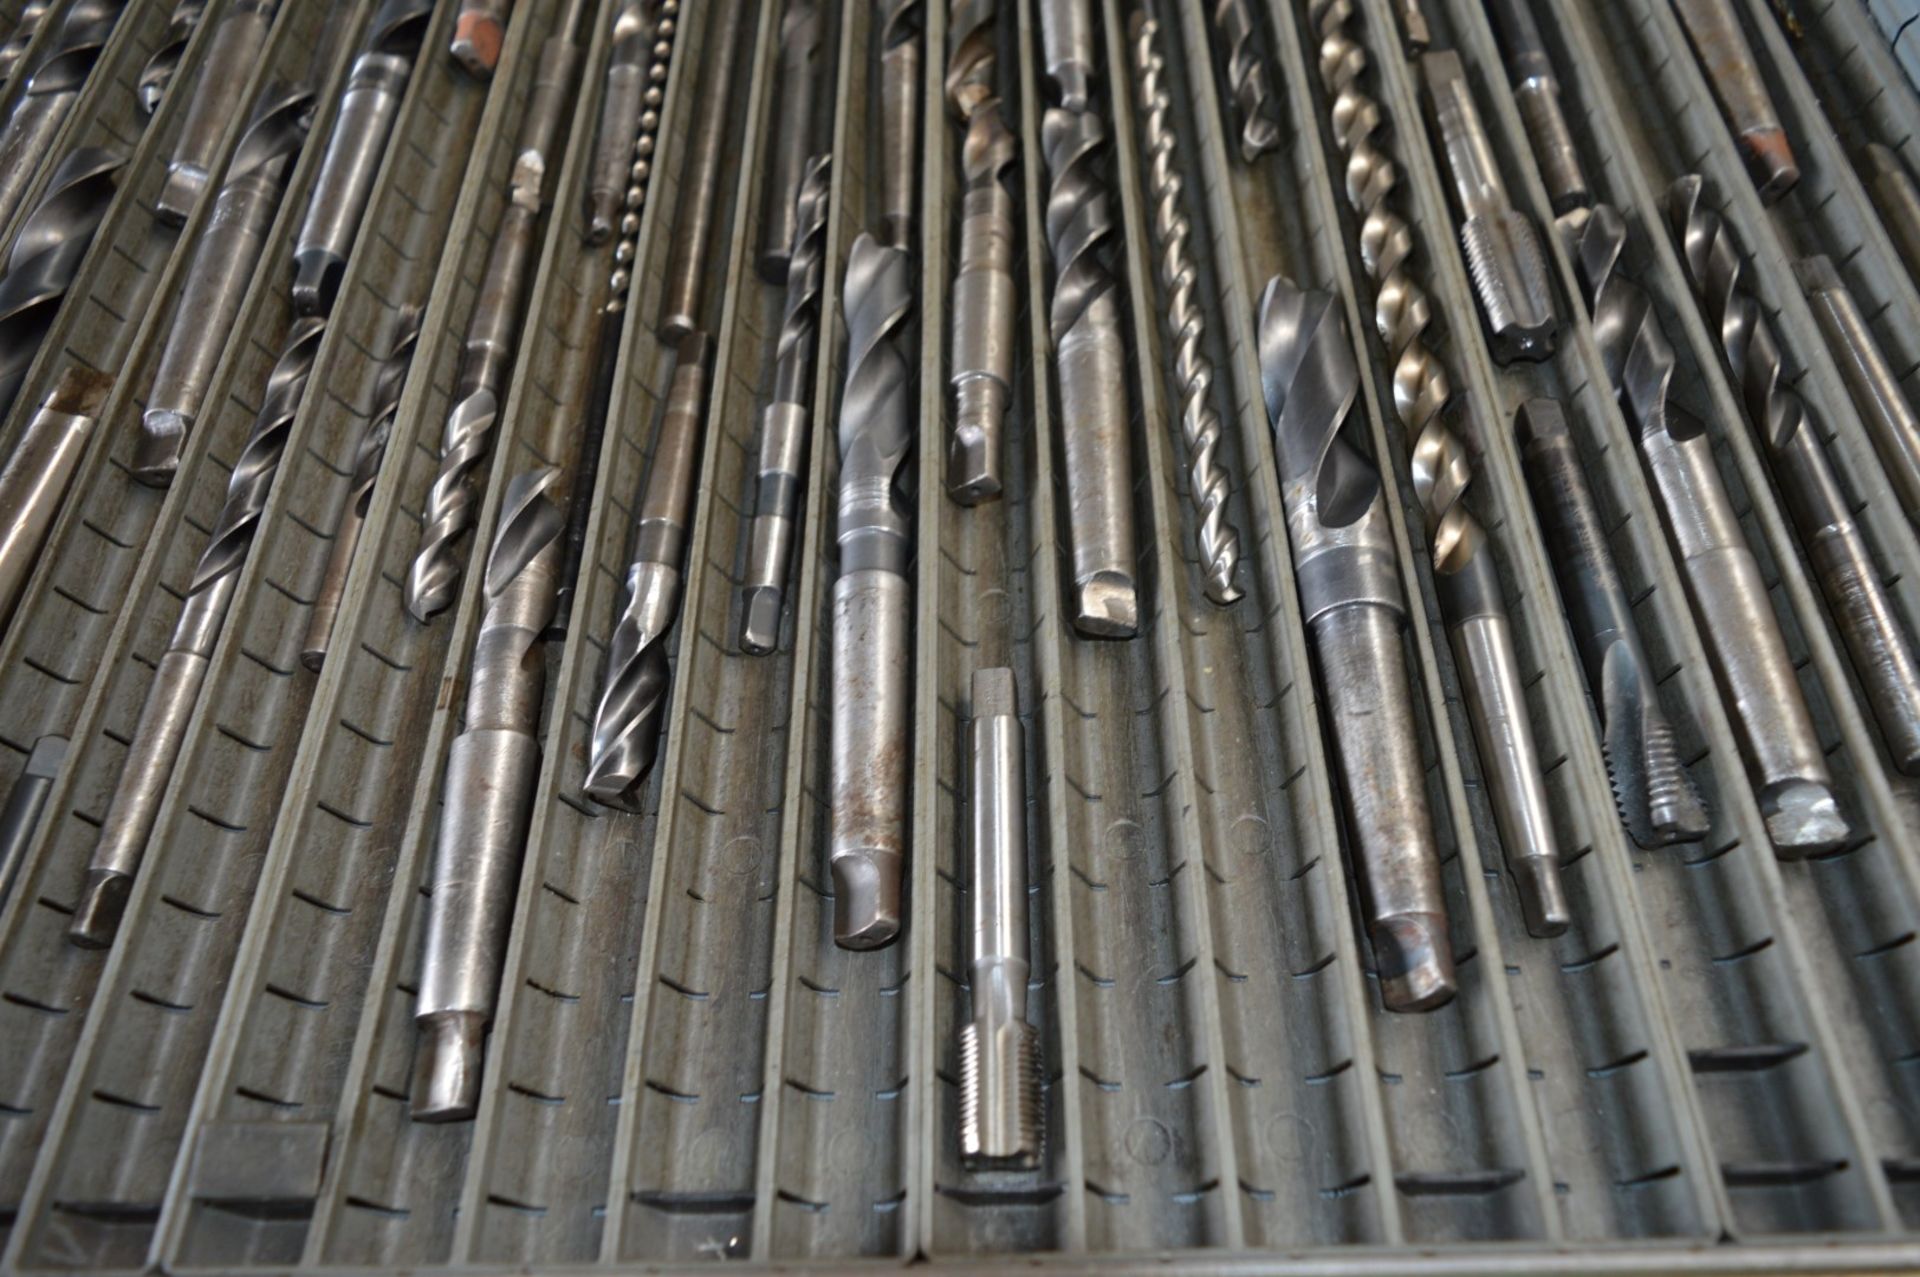 1 x Assorted Lot of Machine Drill Bits - Information to Follow - Please See Pictures Provided - - Image 9 of 11